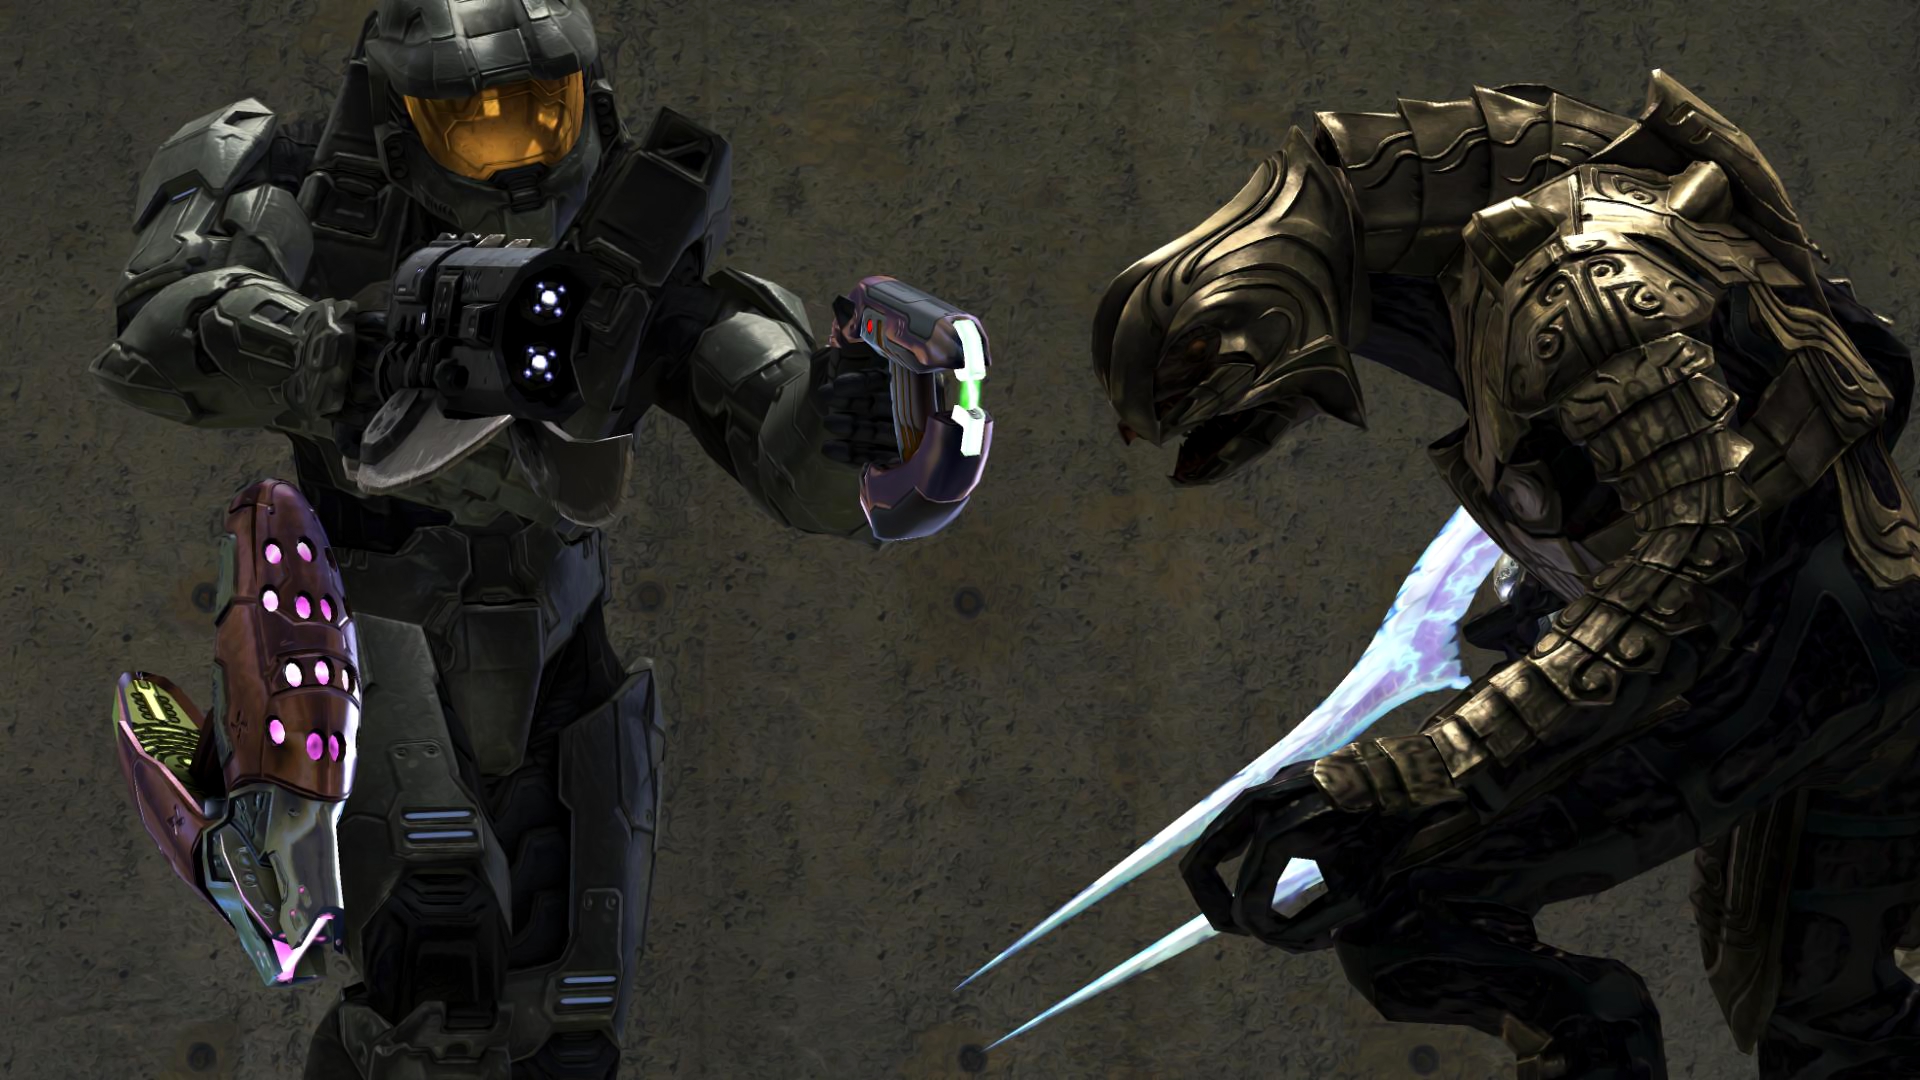 Halo Master Chief And Arbiter Wallpaper Image Pictures Becuo